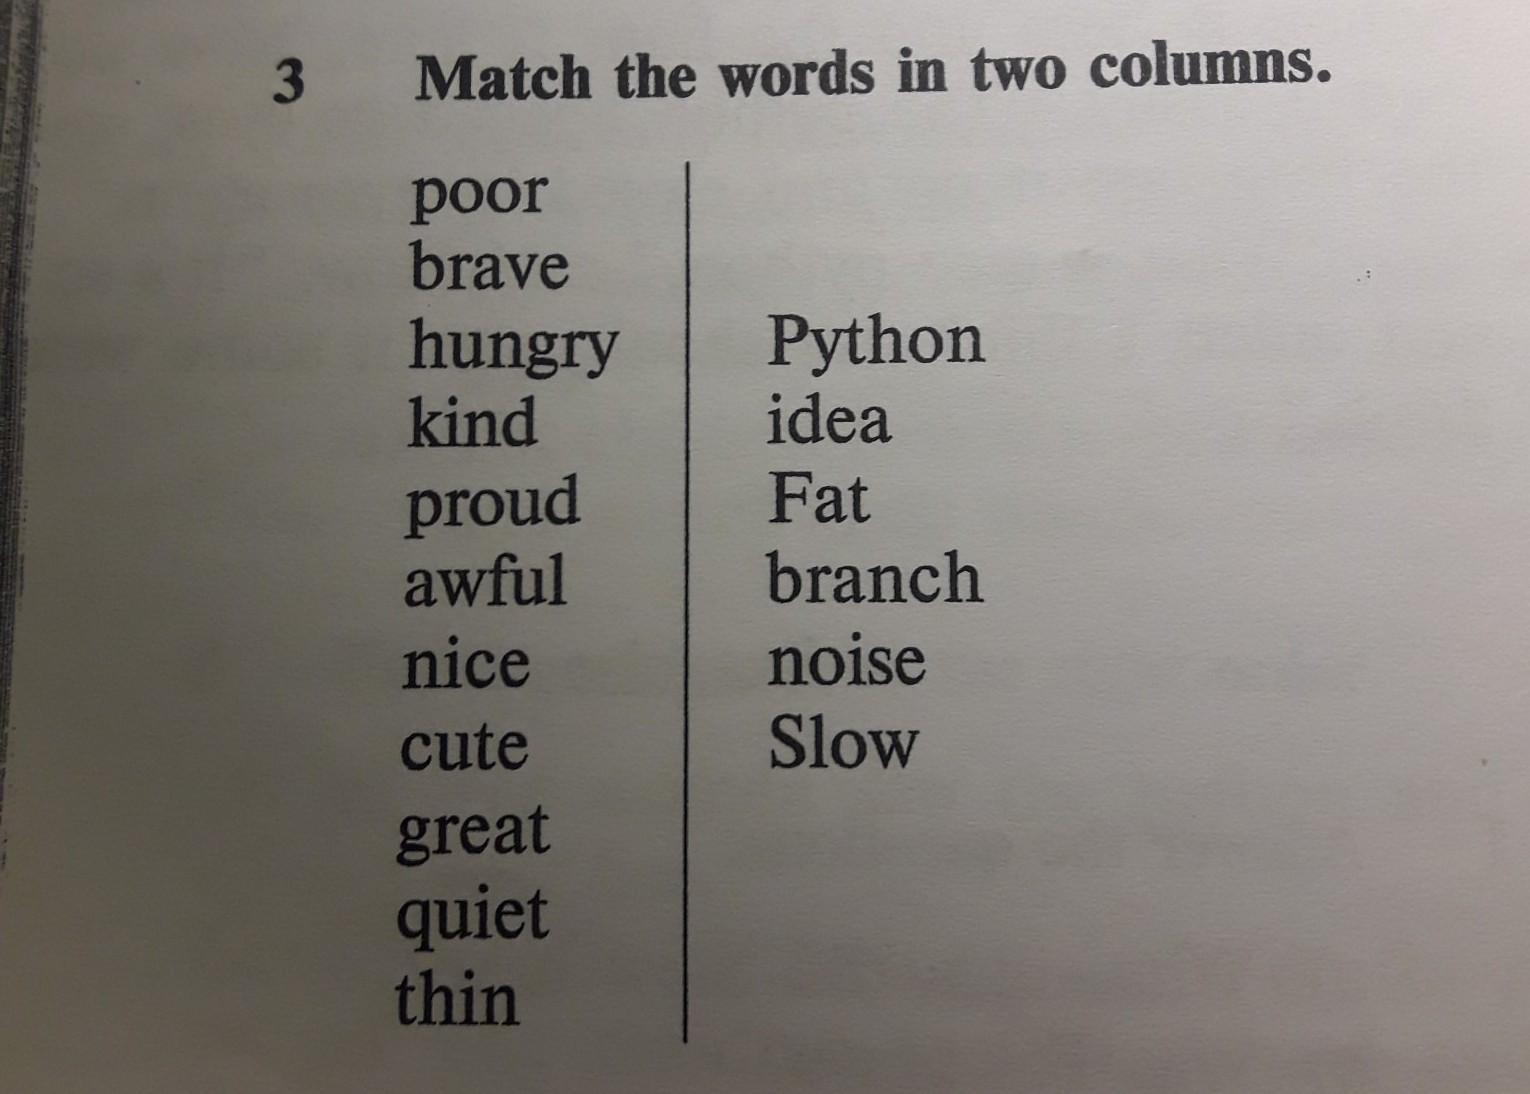 Match the two columns to form